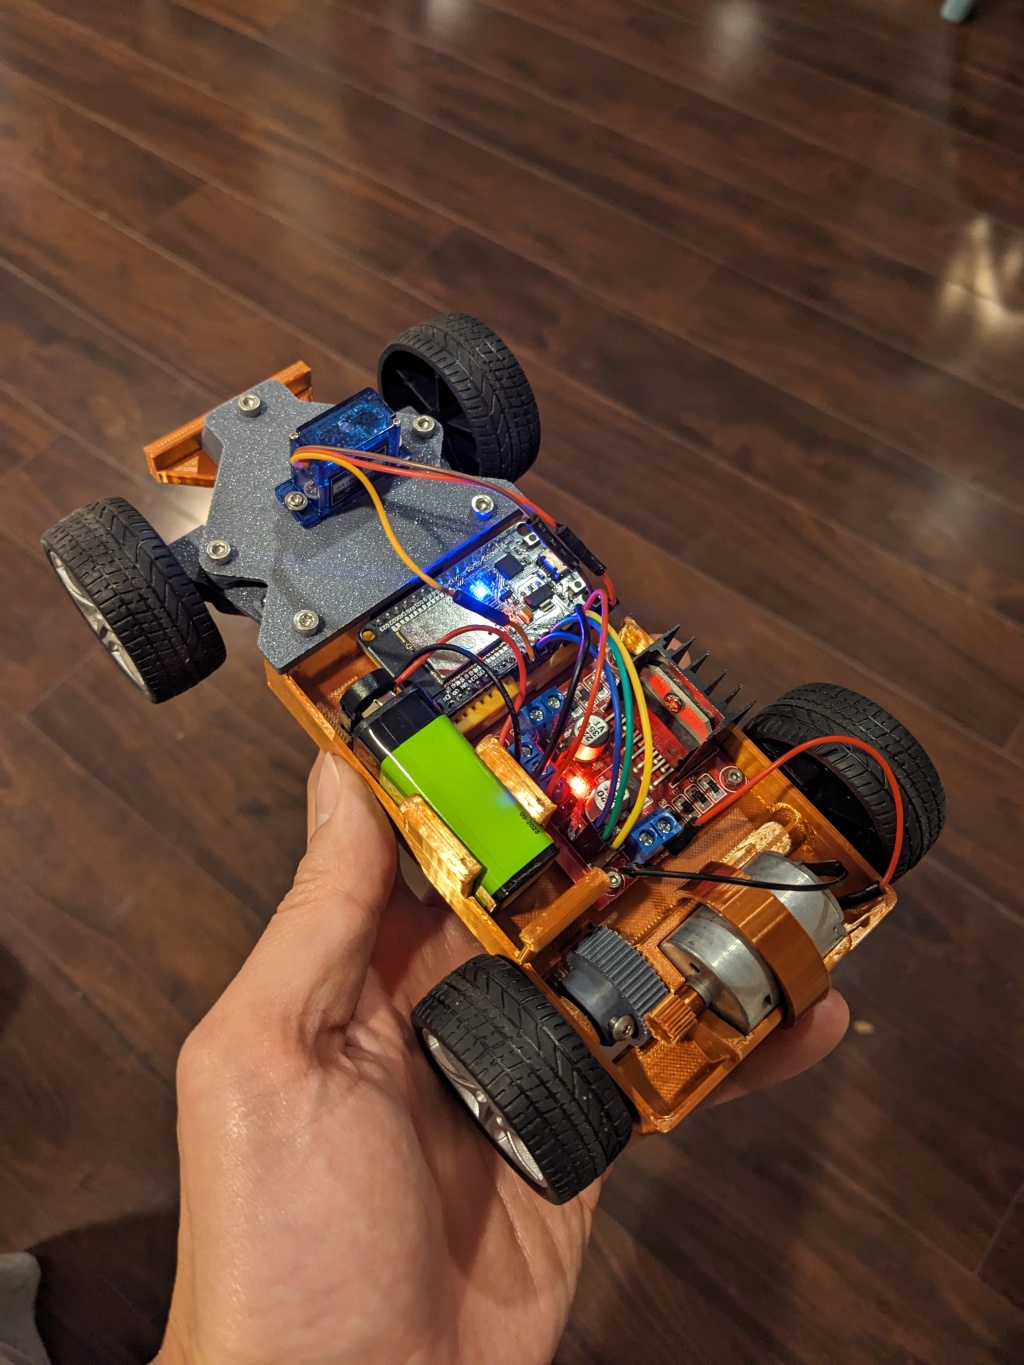 Empowering Young Engineers: Crafting the Sailoi RC Car Kit